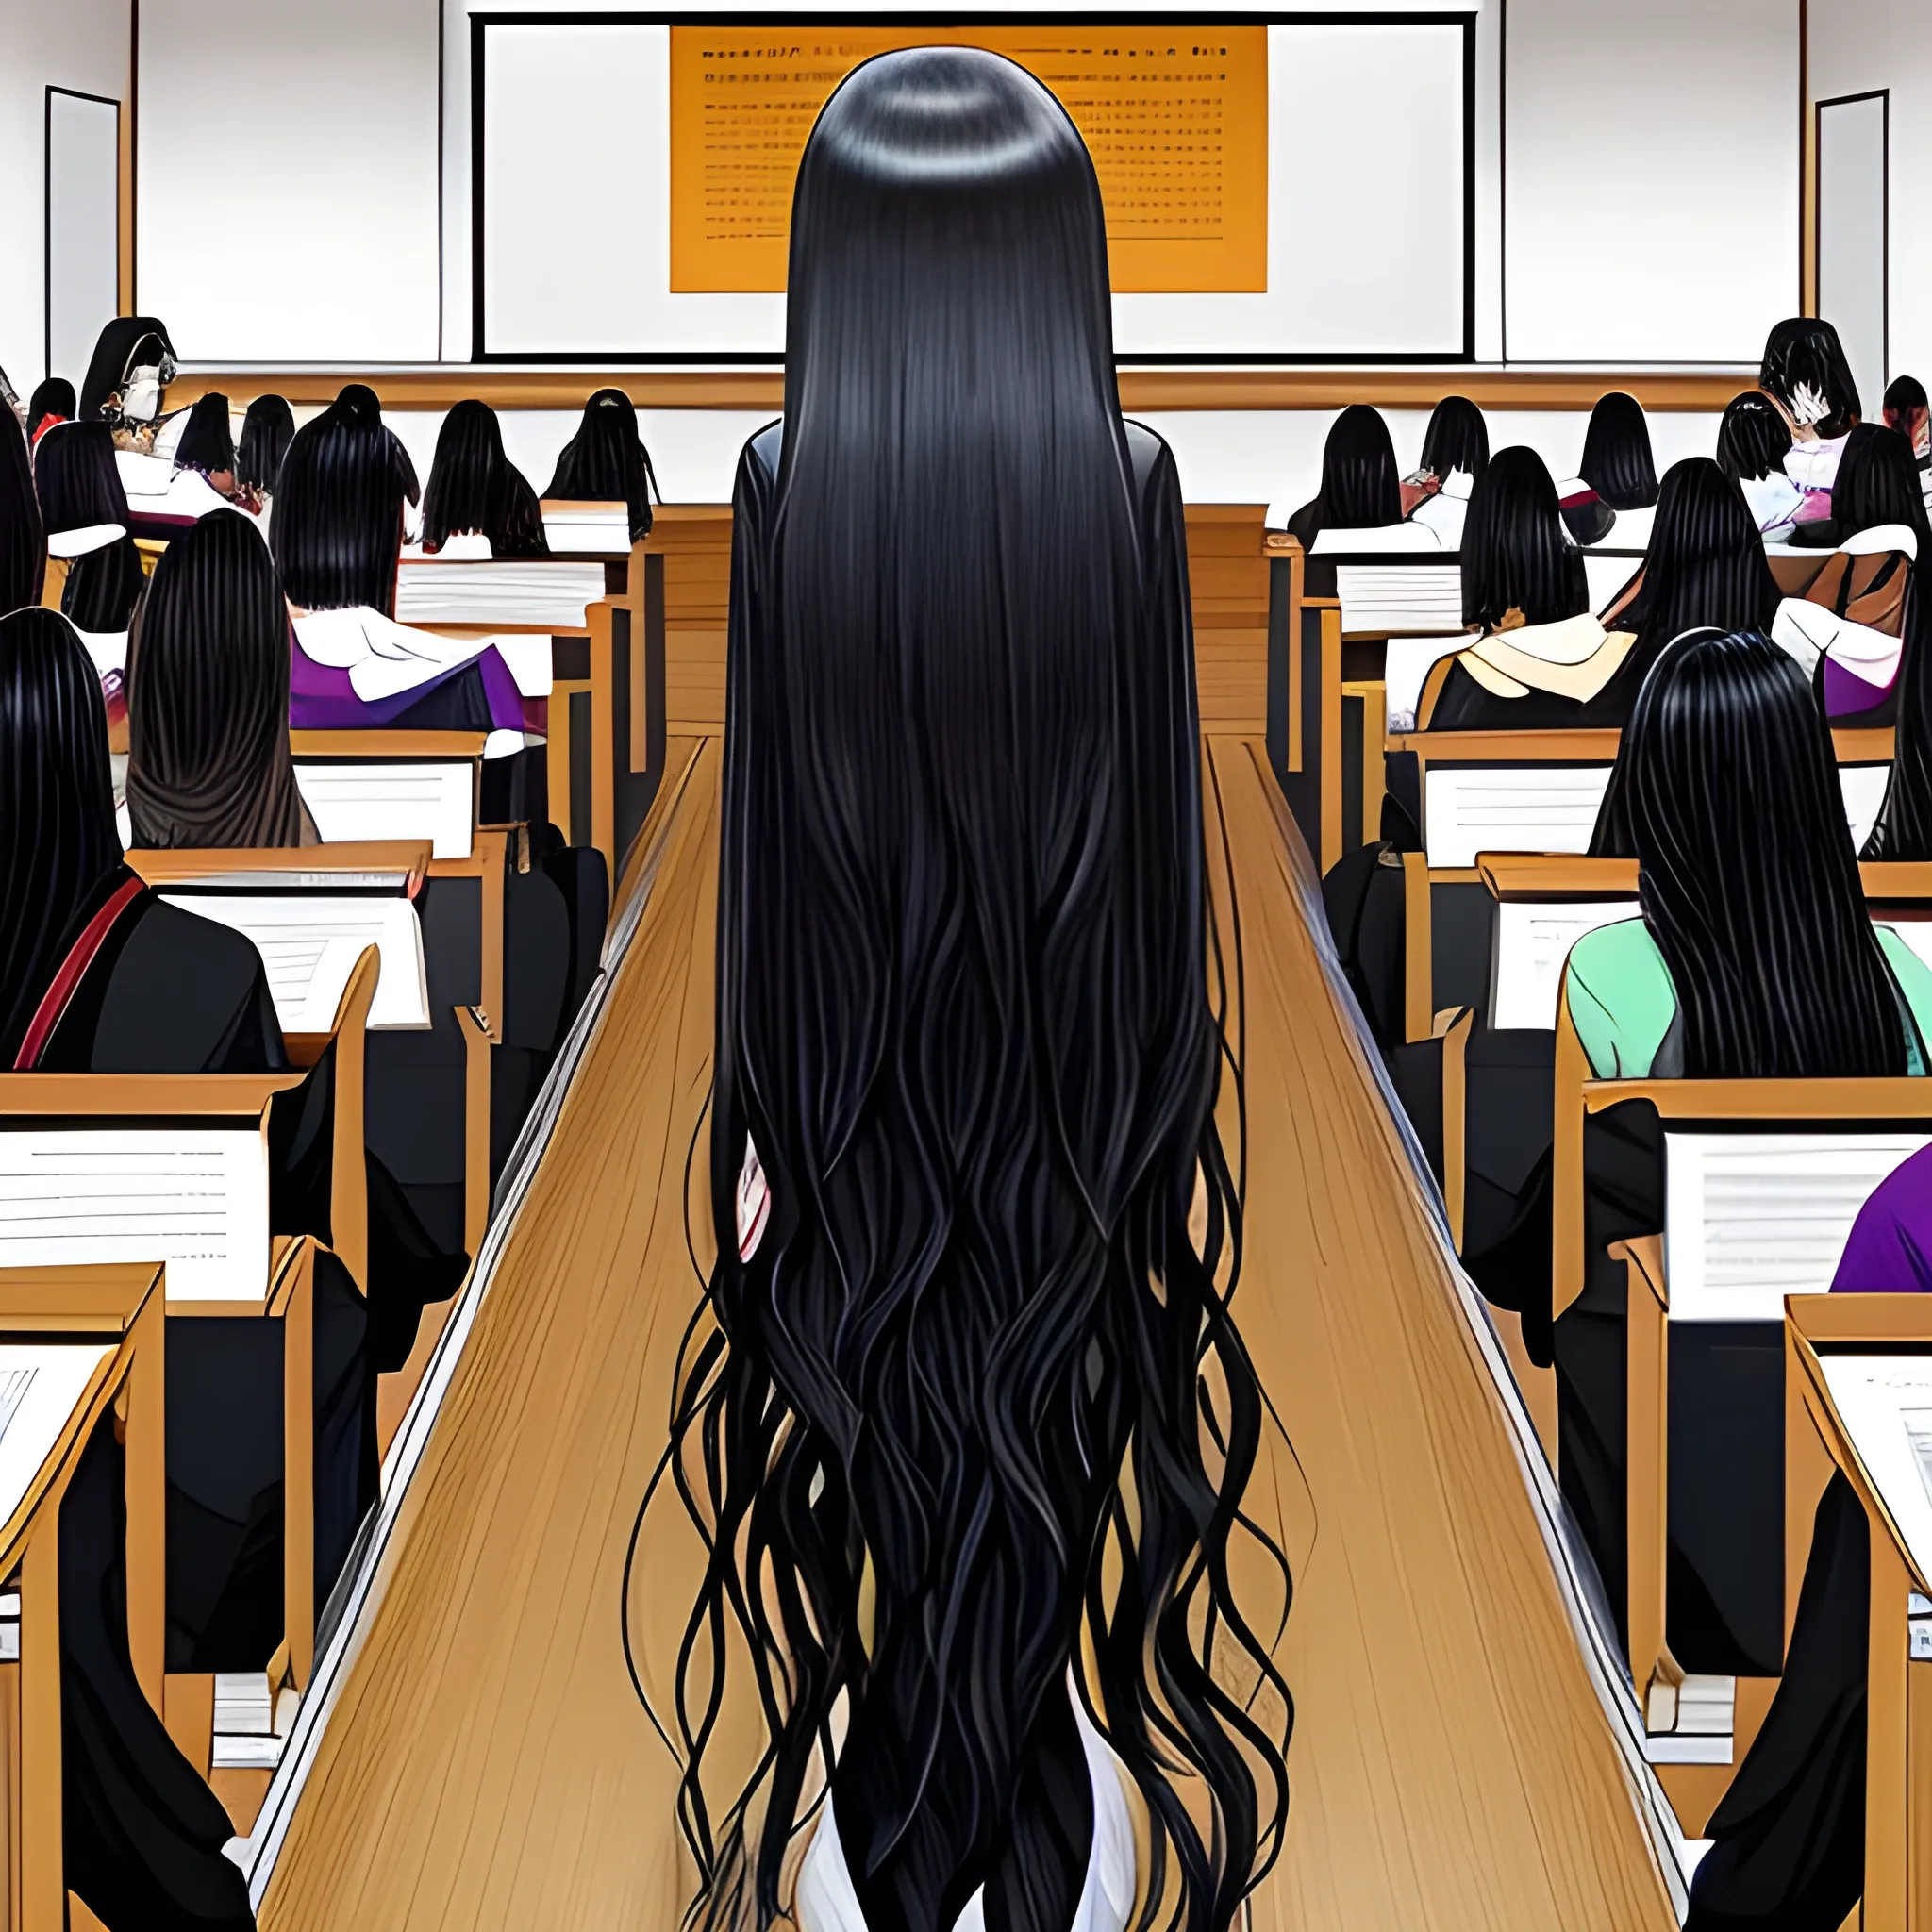 
A stern anime school teacher stands at the front of a crowded lecture hall, her long black hair cascading down her back as she lectures her students on the intricacies of quantum physics.